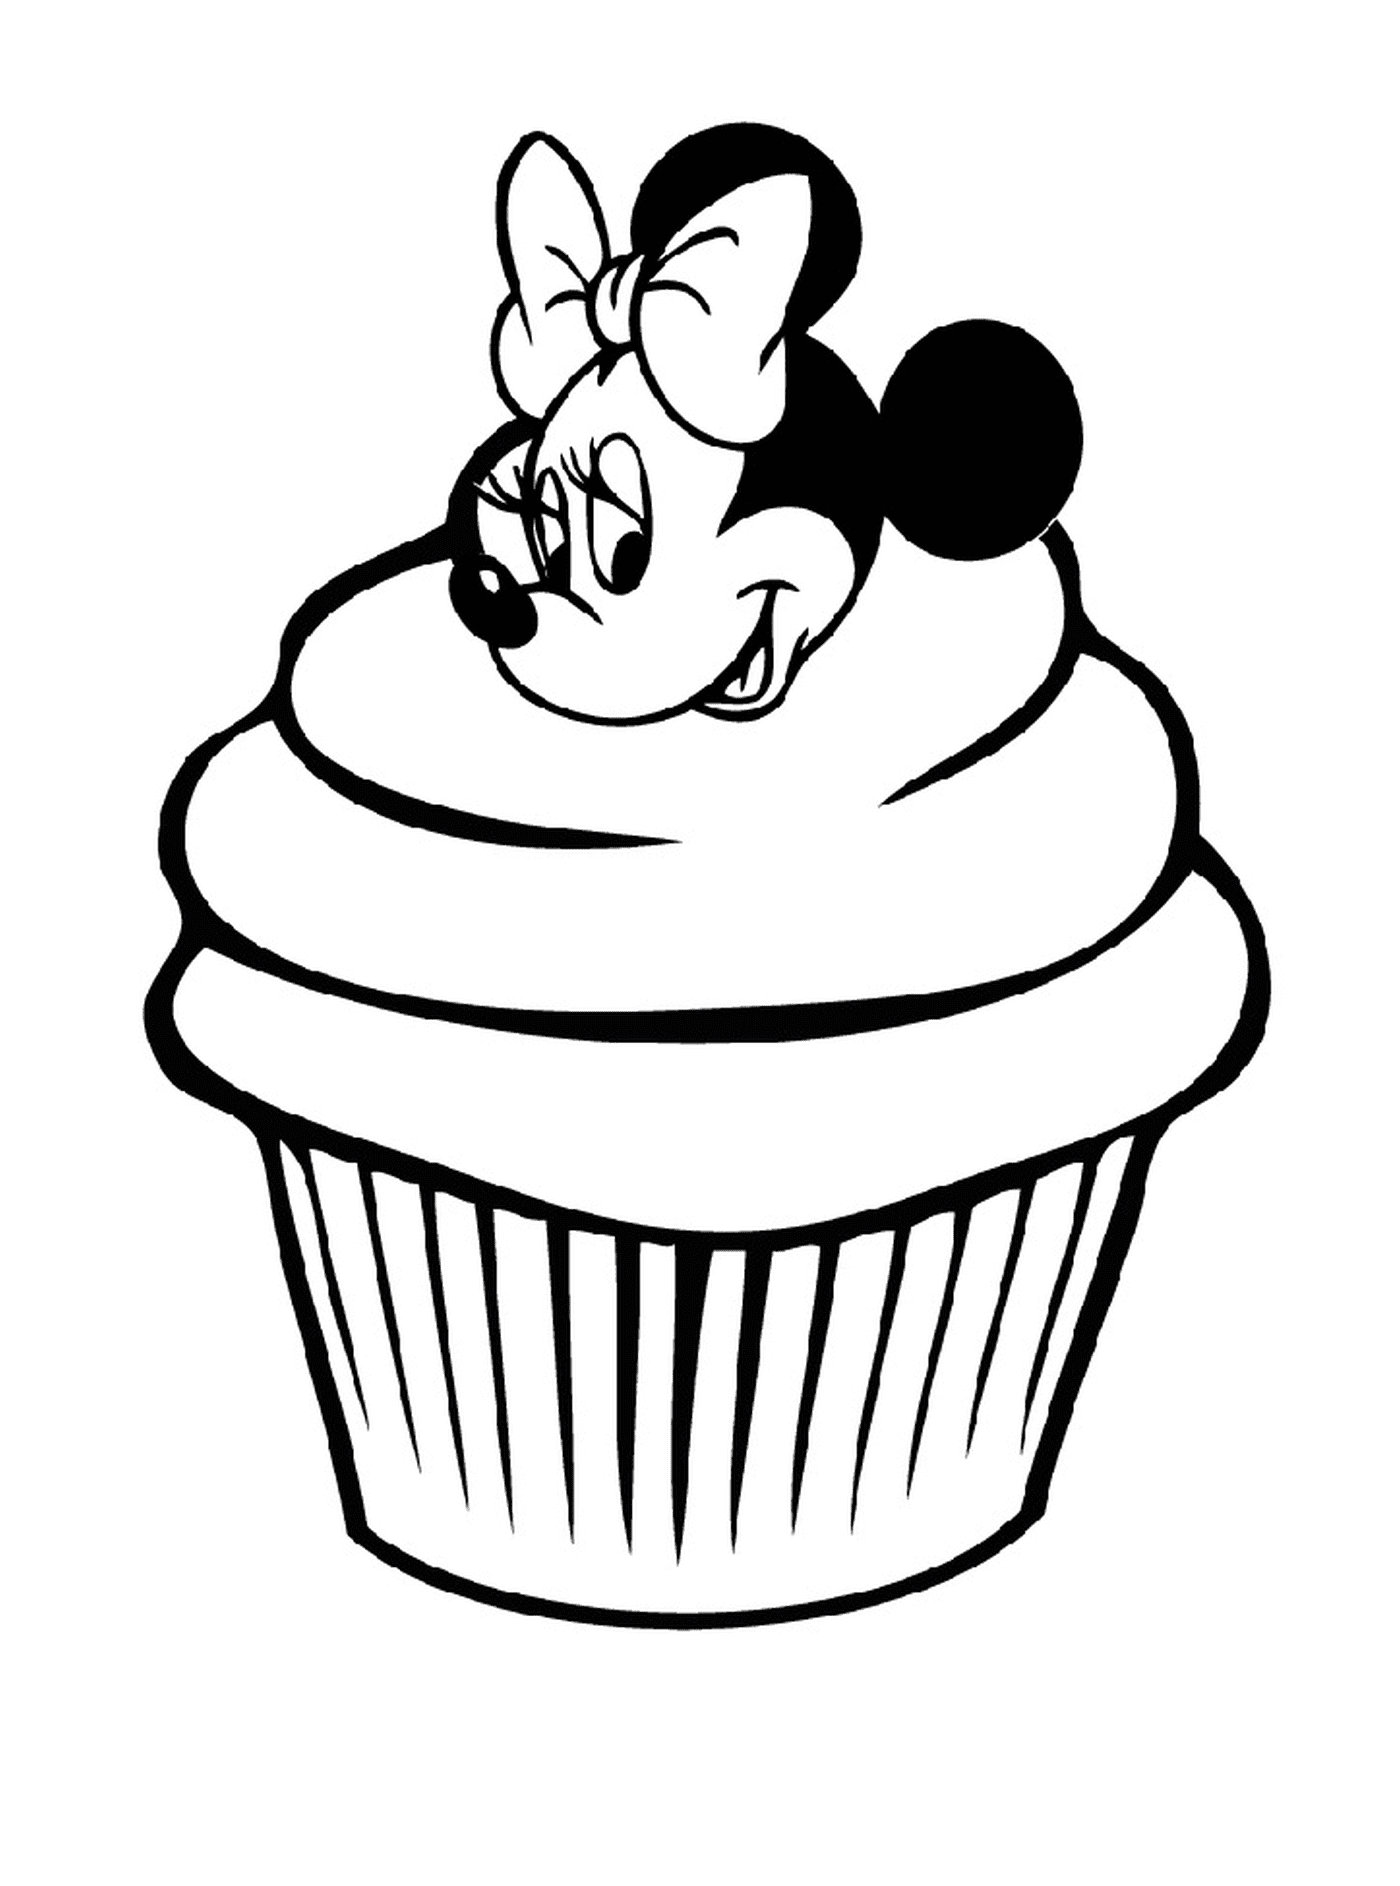  A Minnie Mouse cupcake from Disney 